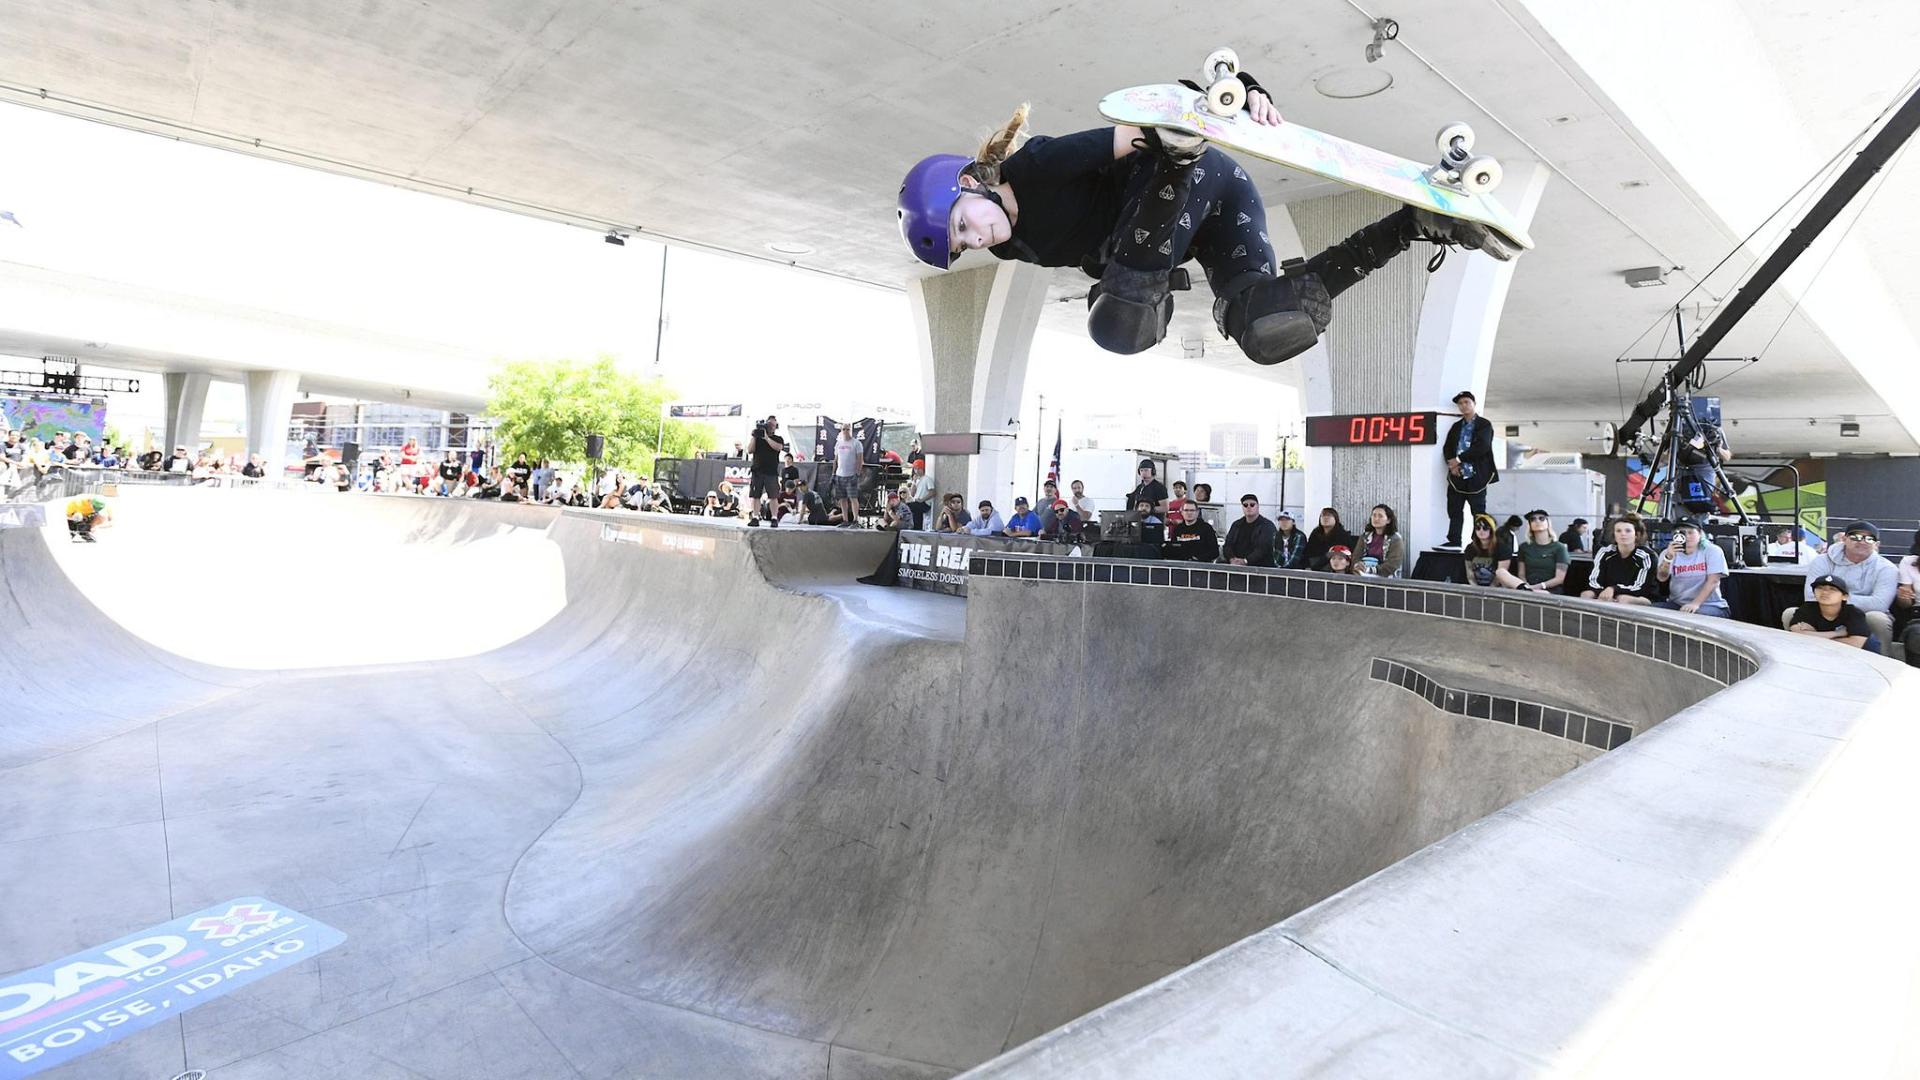 Sabre Norris wins Women's Skate Park at Road To X Games Boise 2018